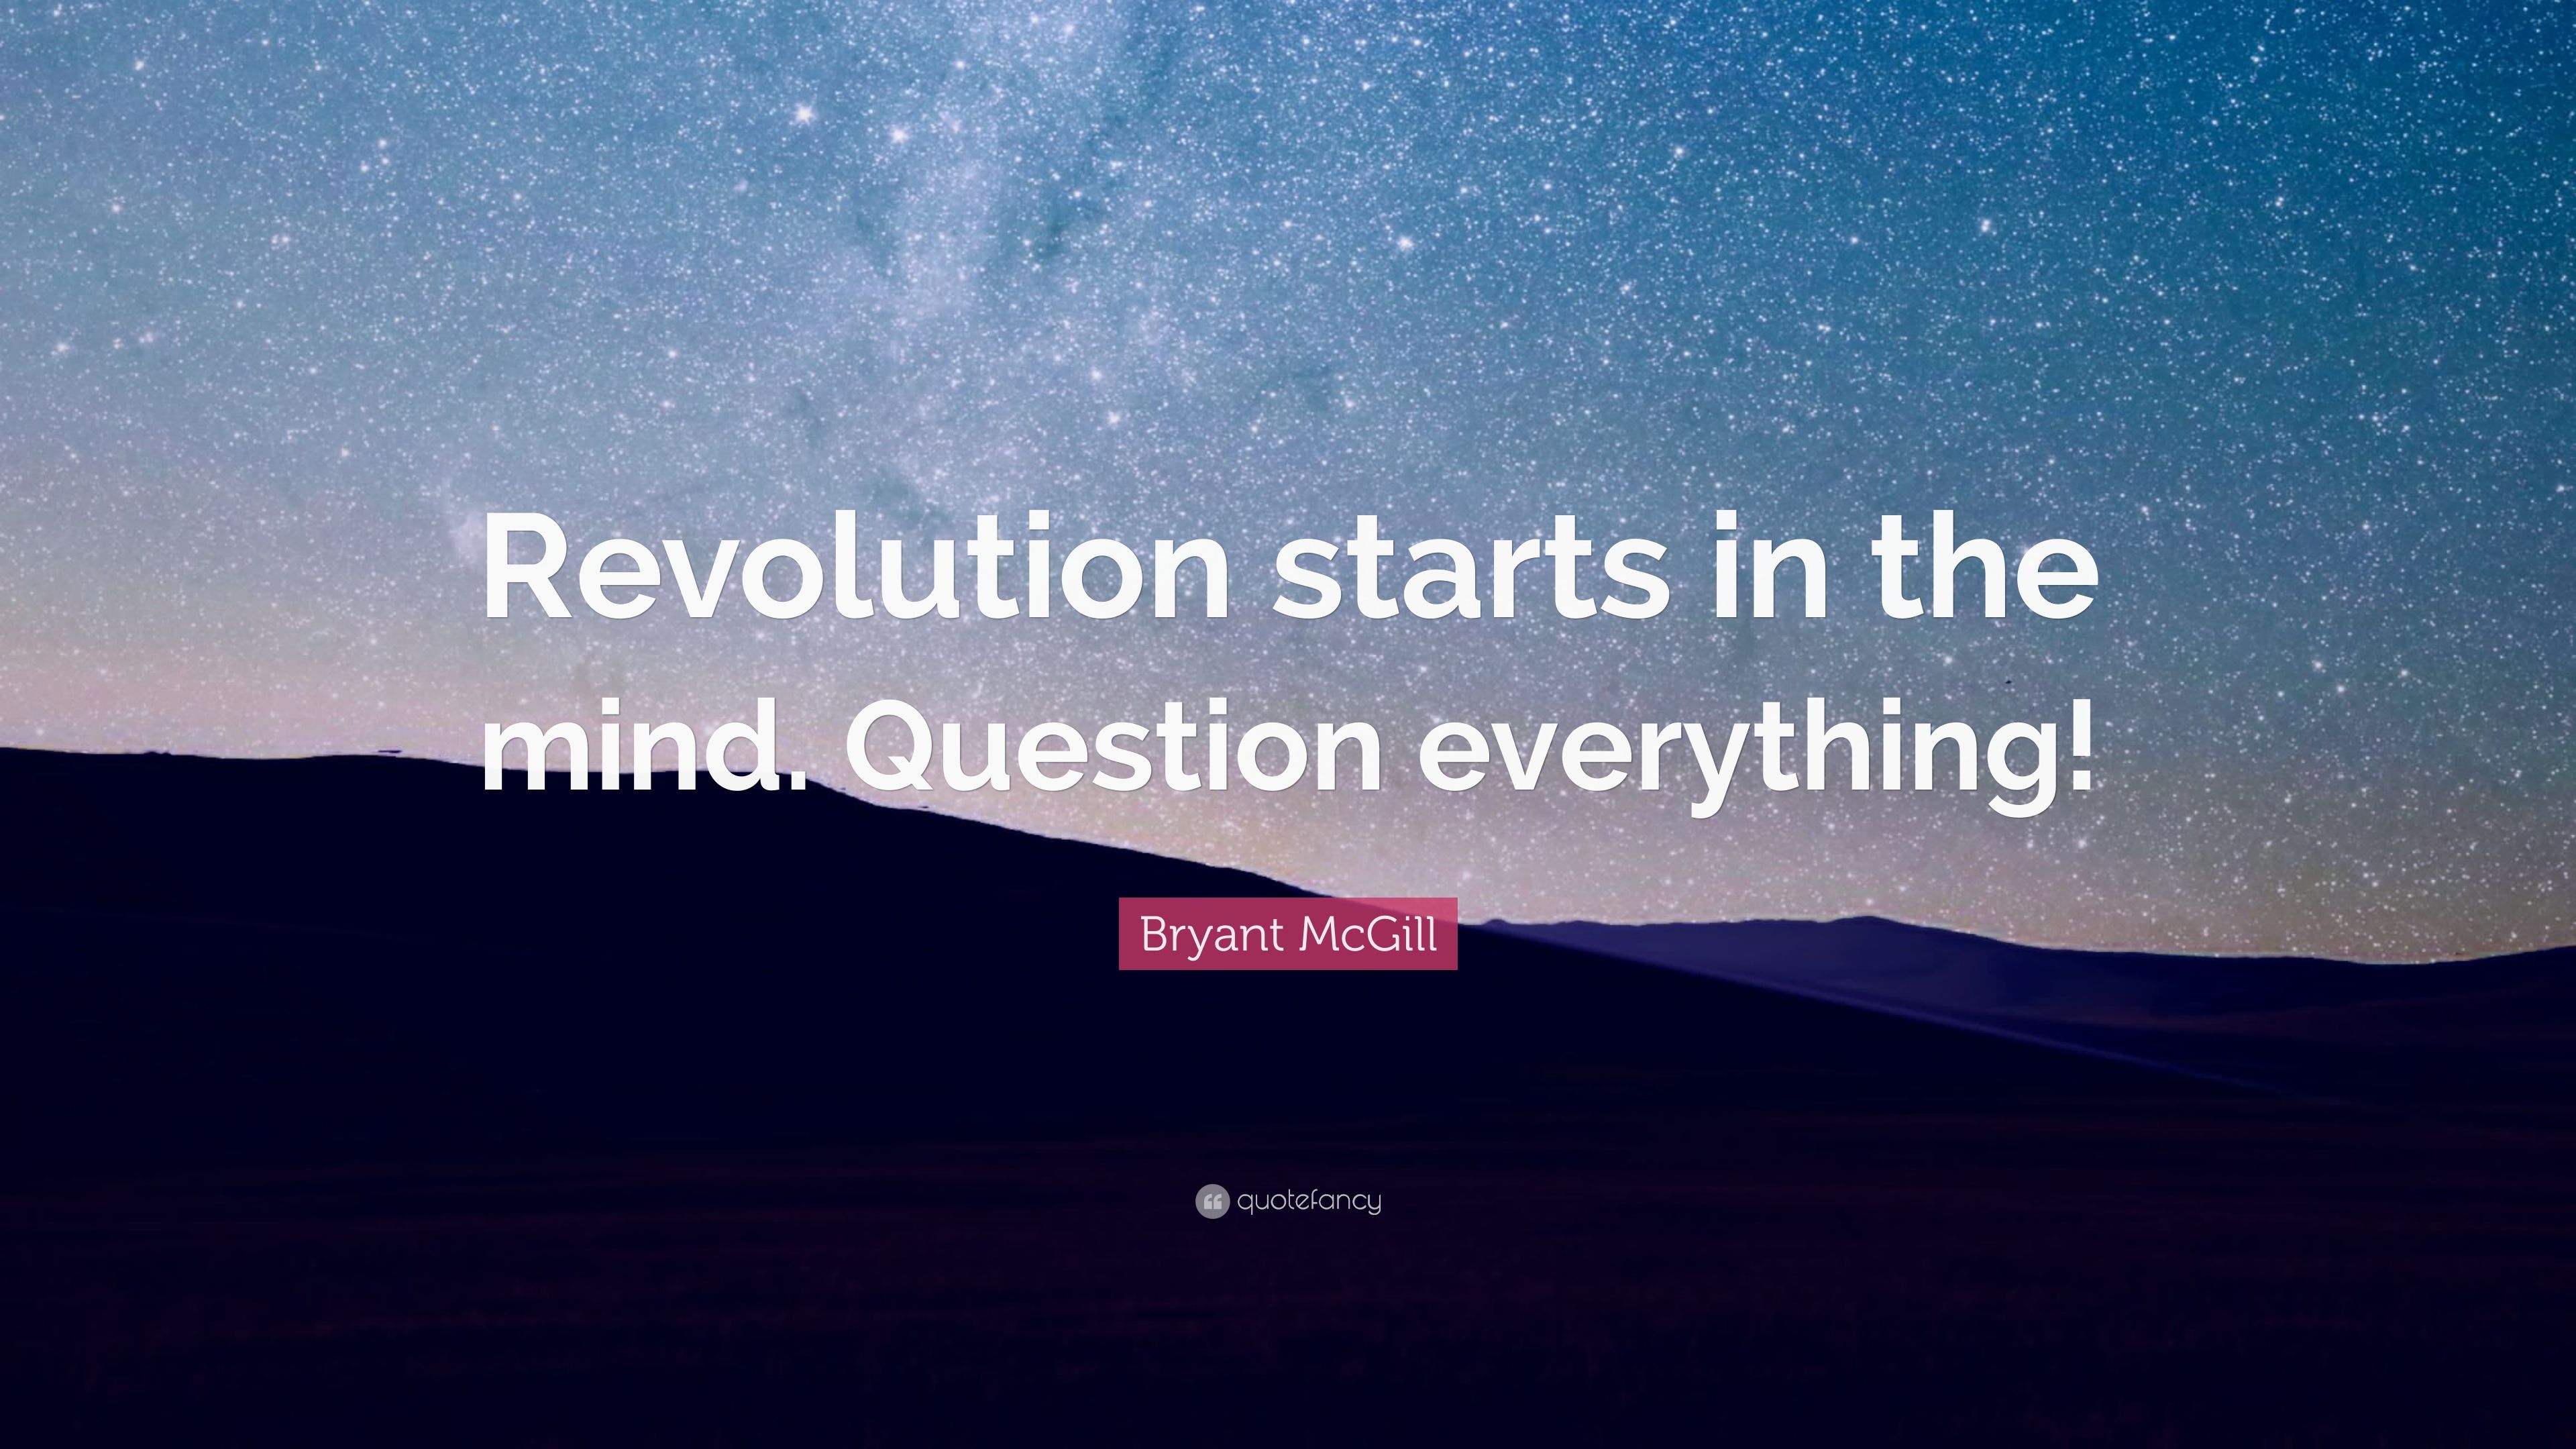 Bryant McGill Quote: “Revolution starts in the mind. Question everything!” (12 wallpaper)